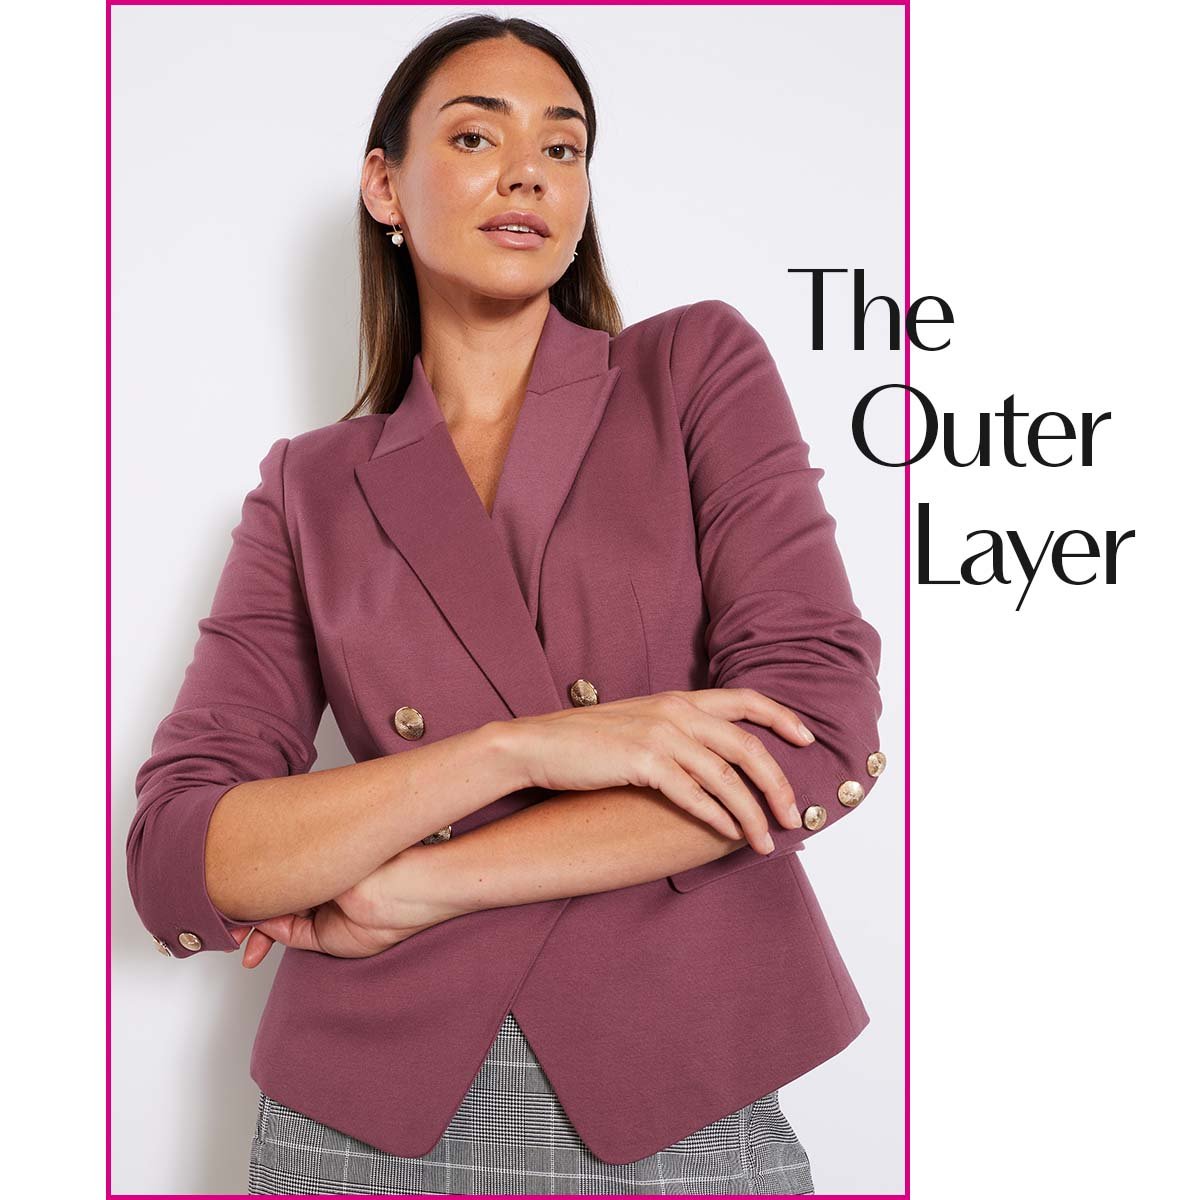 The Outer Layer